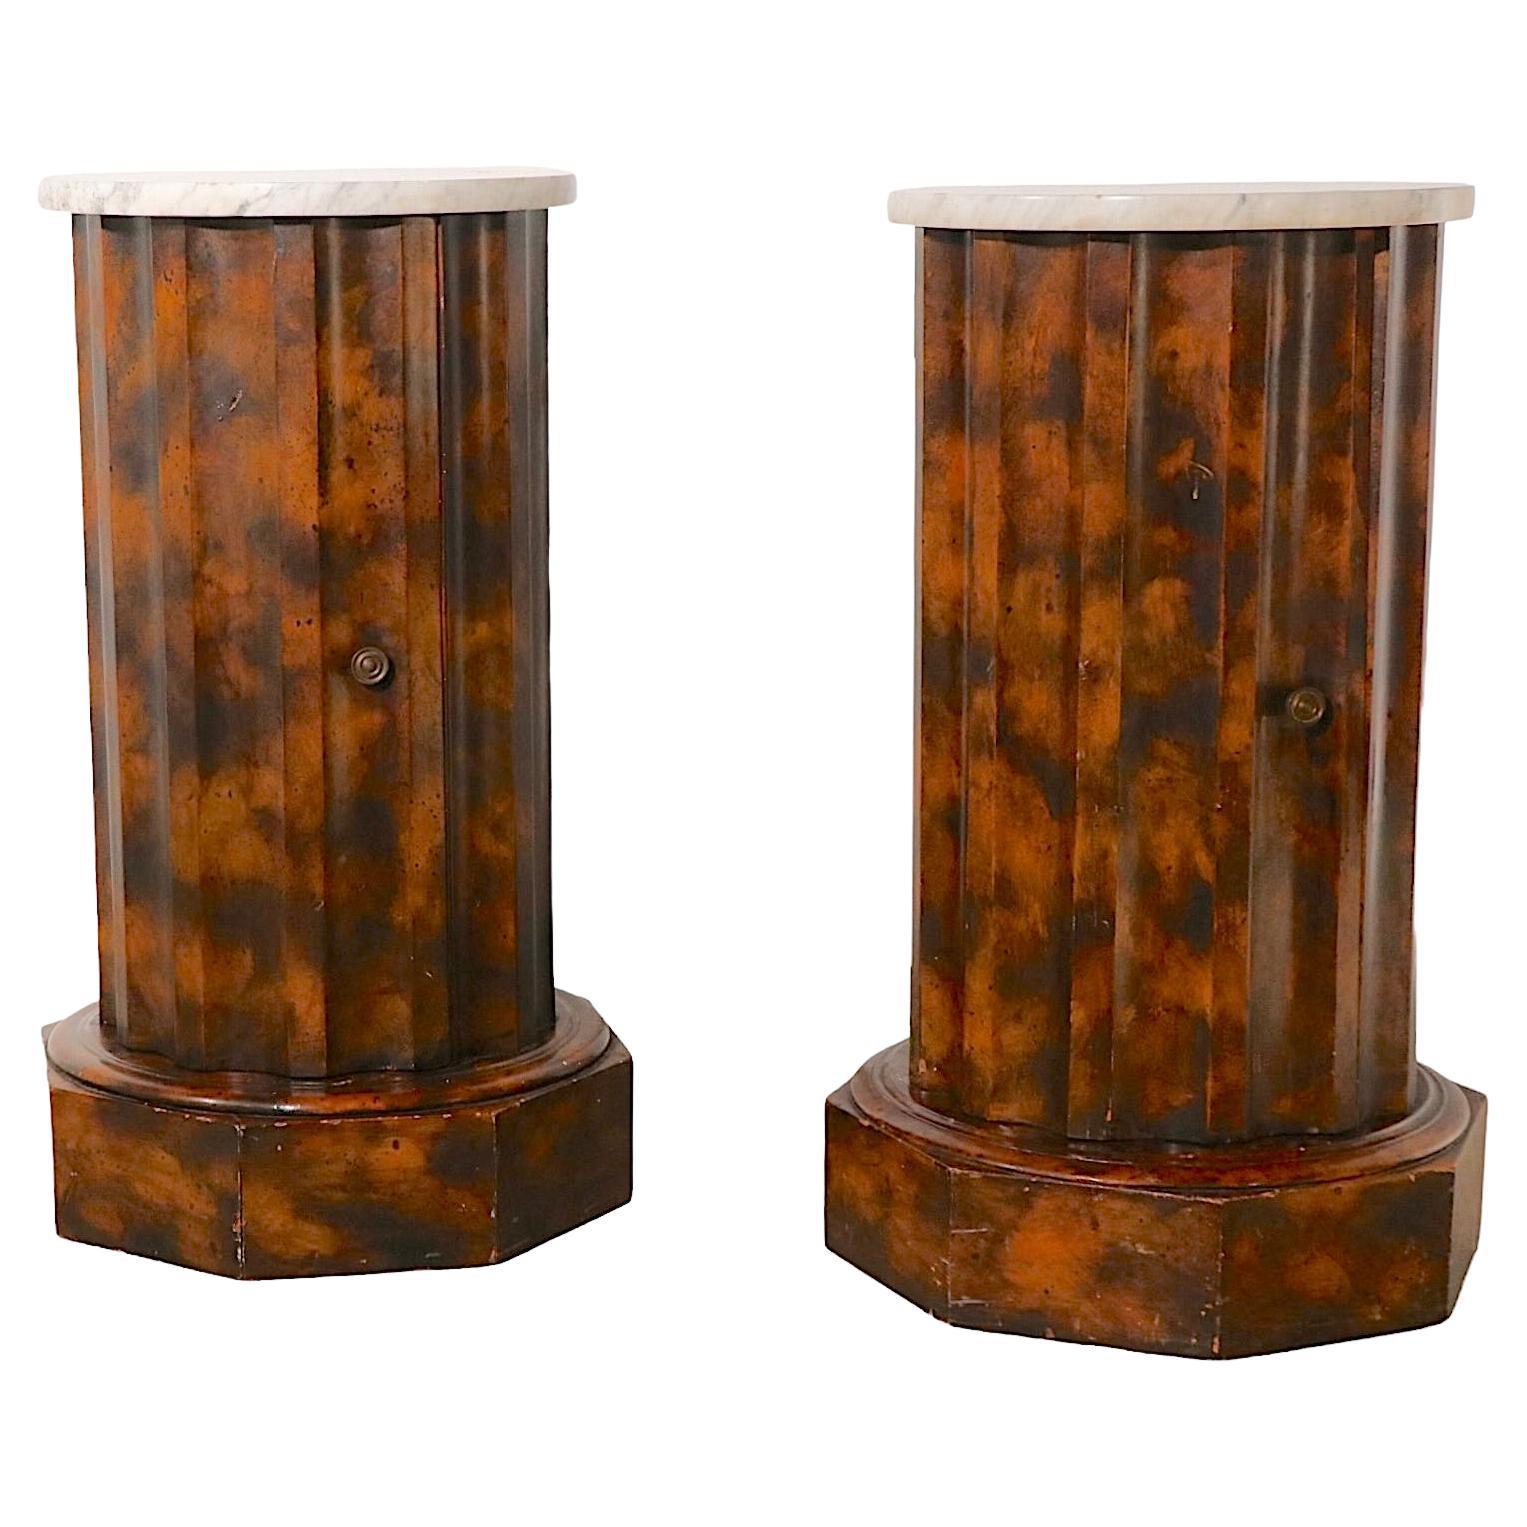 Pr. Decorative Marble Top Half Column Pedestals in Faux Tortoise Shell Finish For Sale